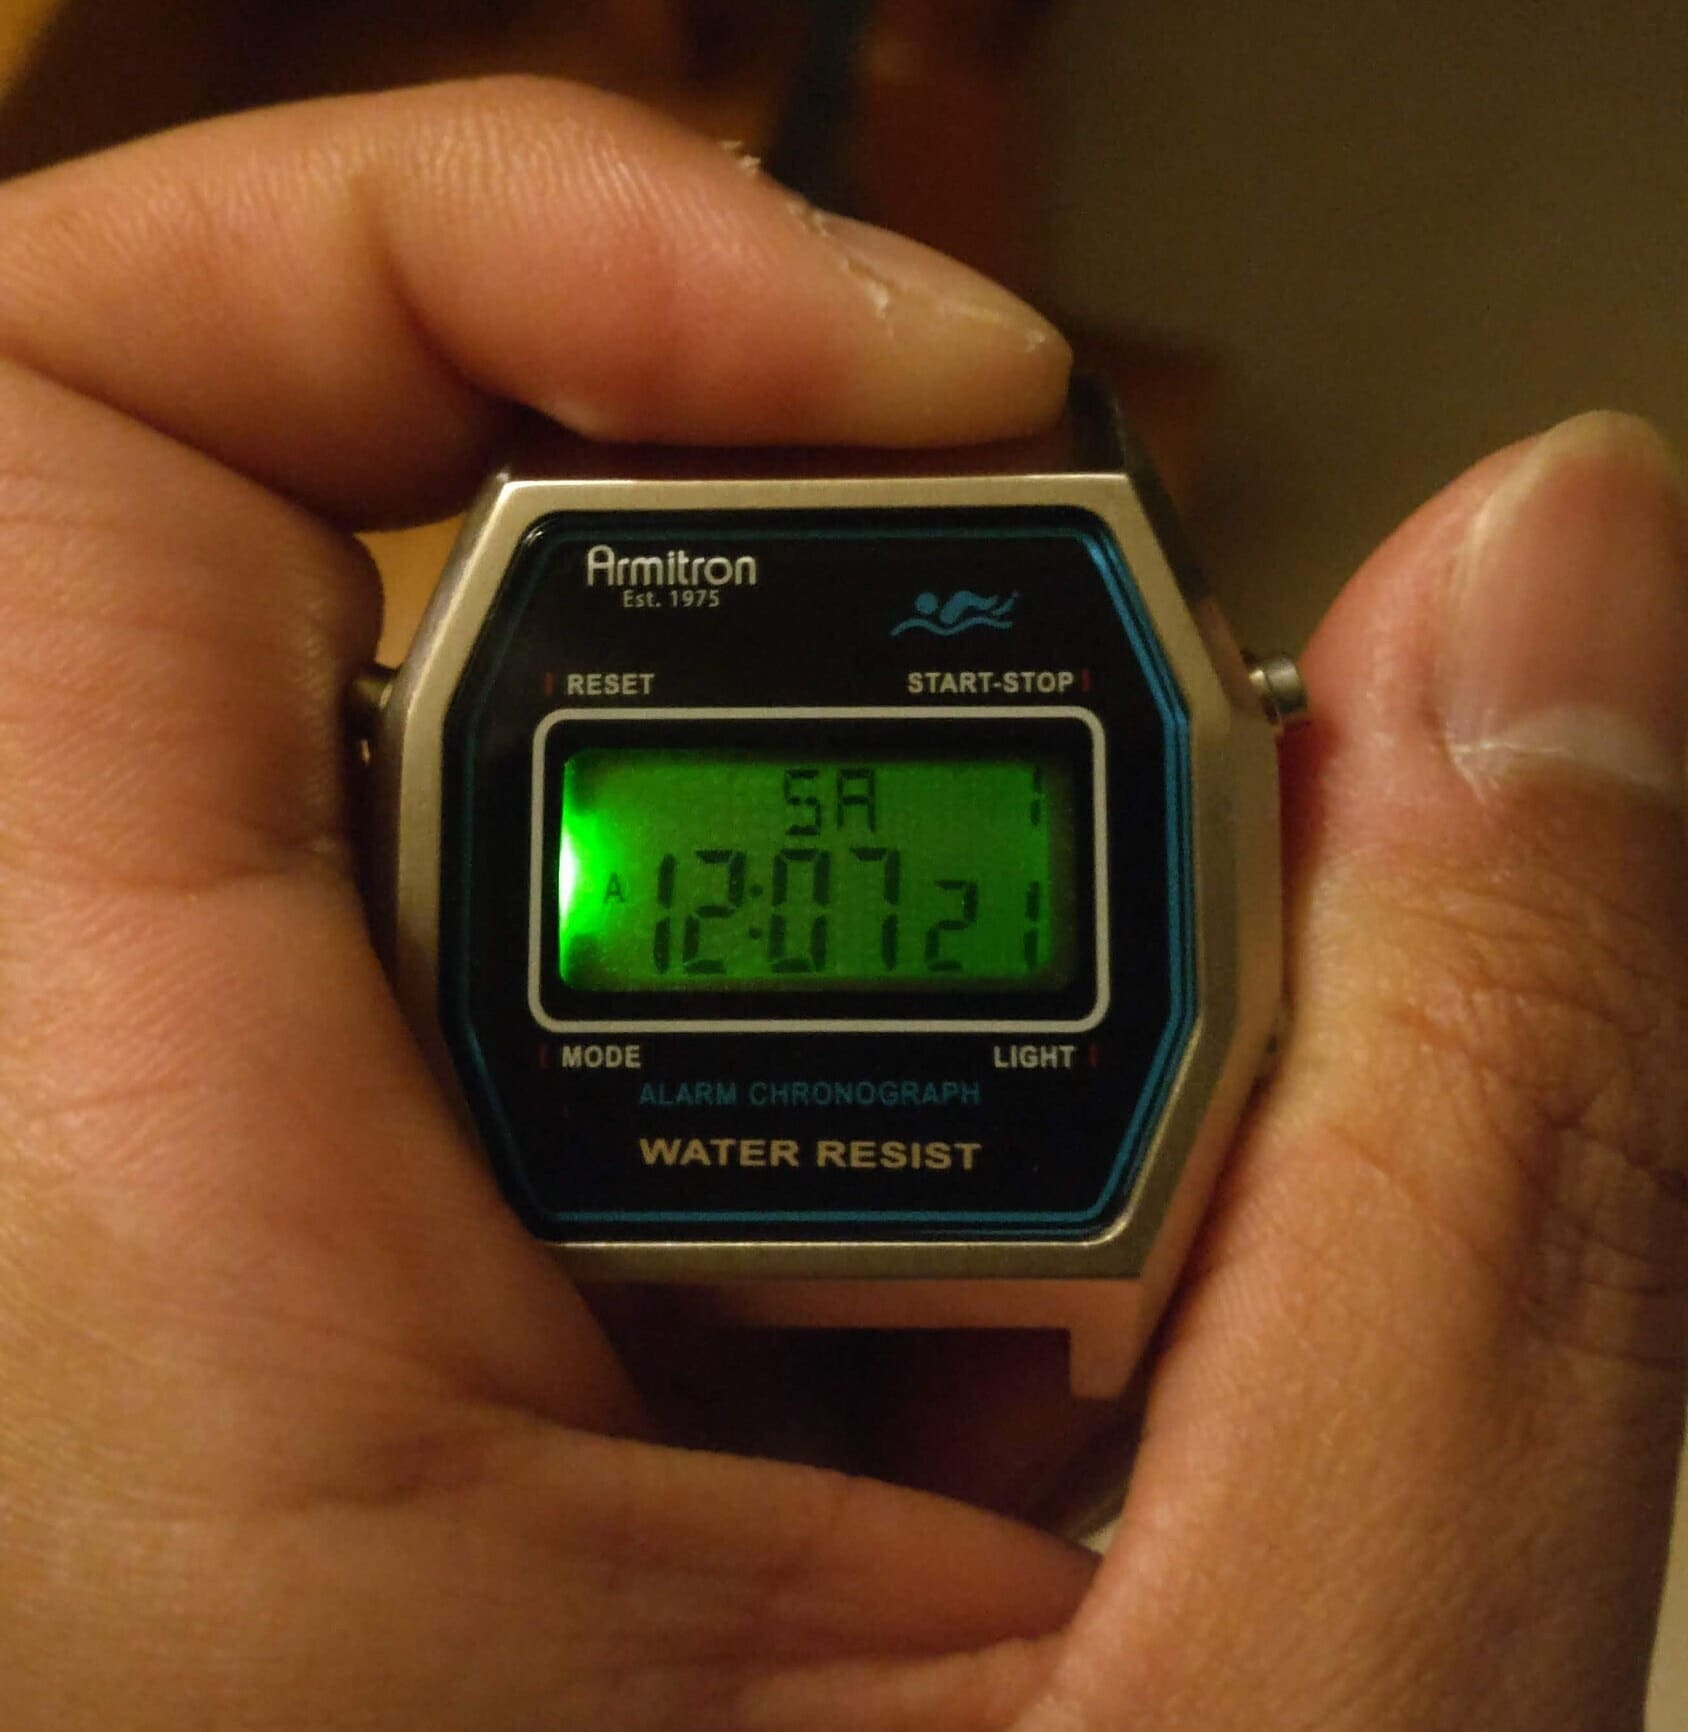 The Armitron Rubik, A Great Digital Watch For An Amazing Price! 